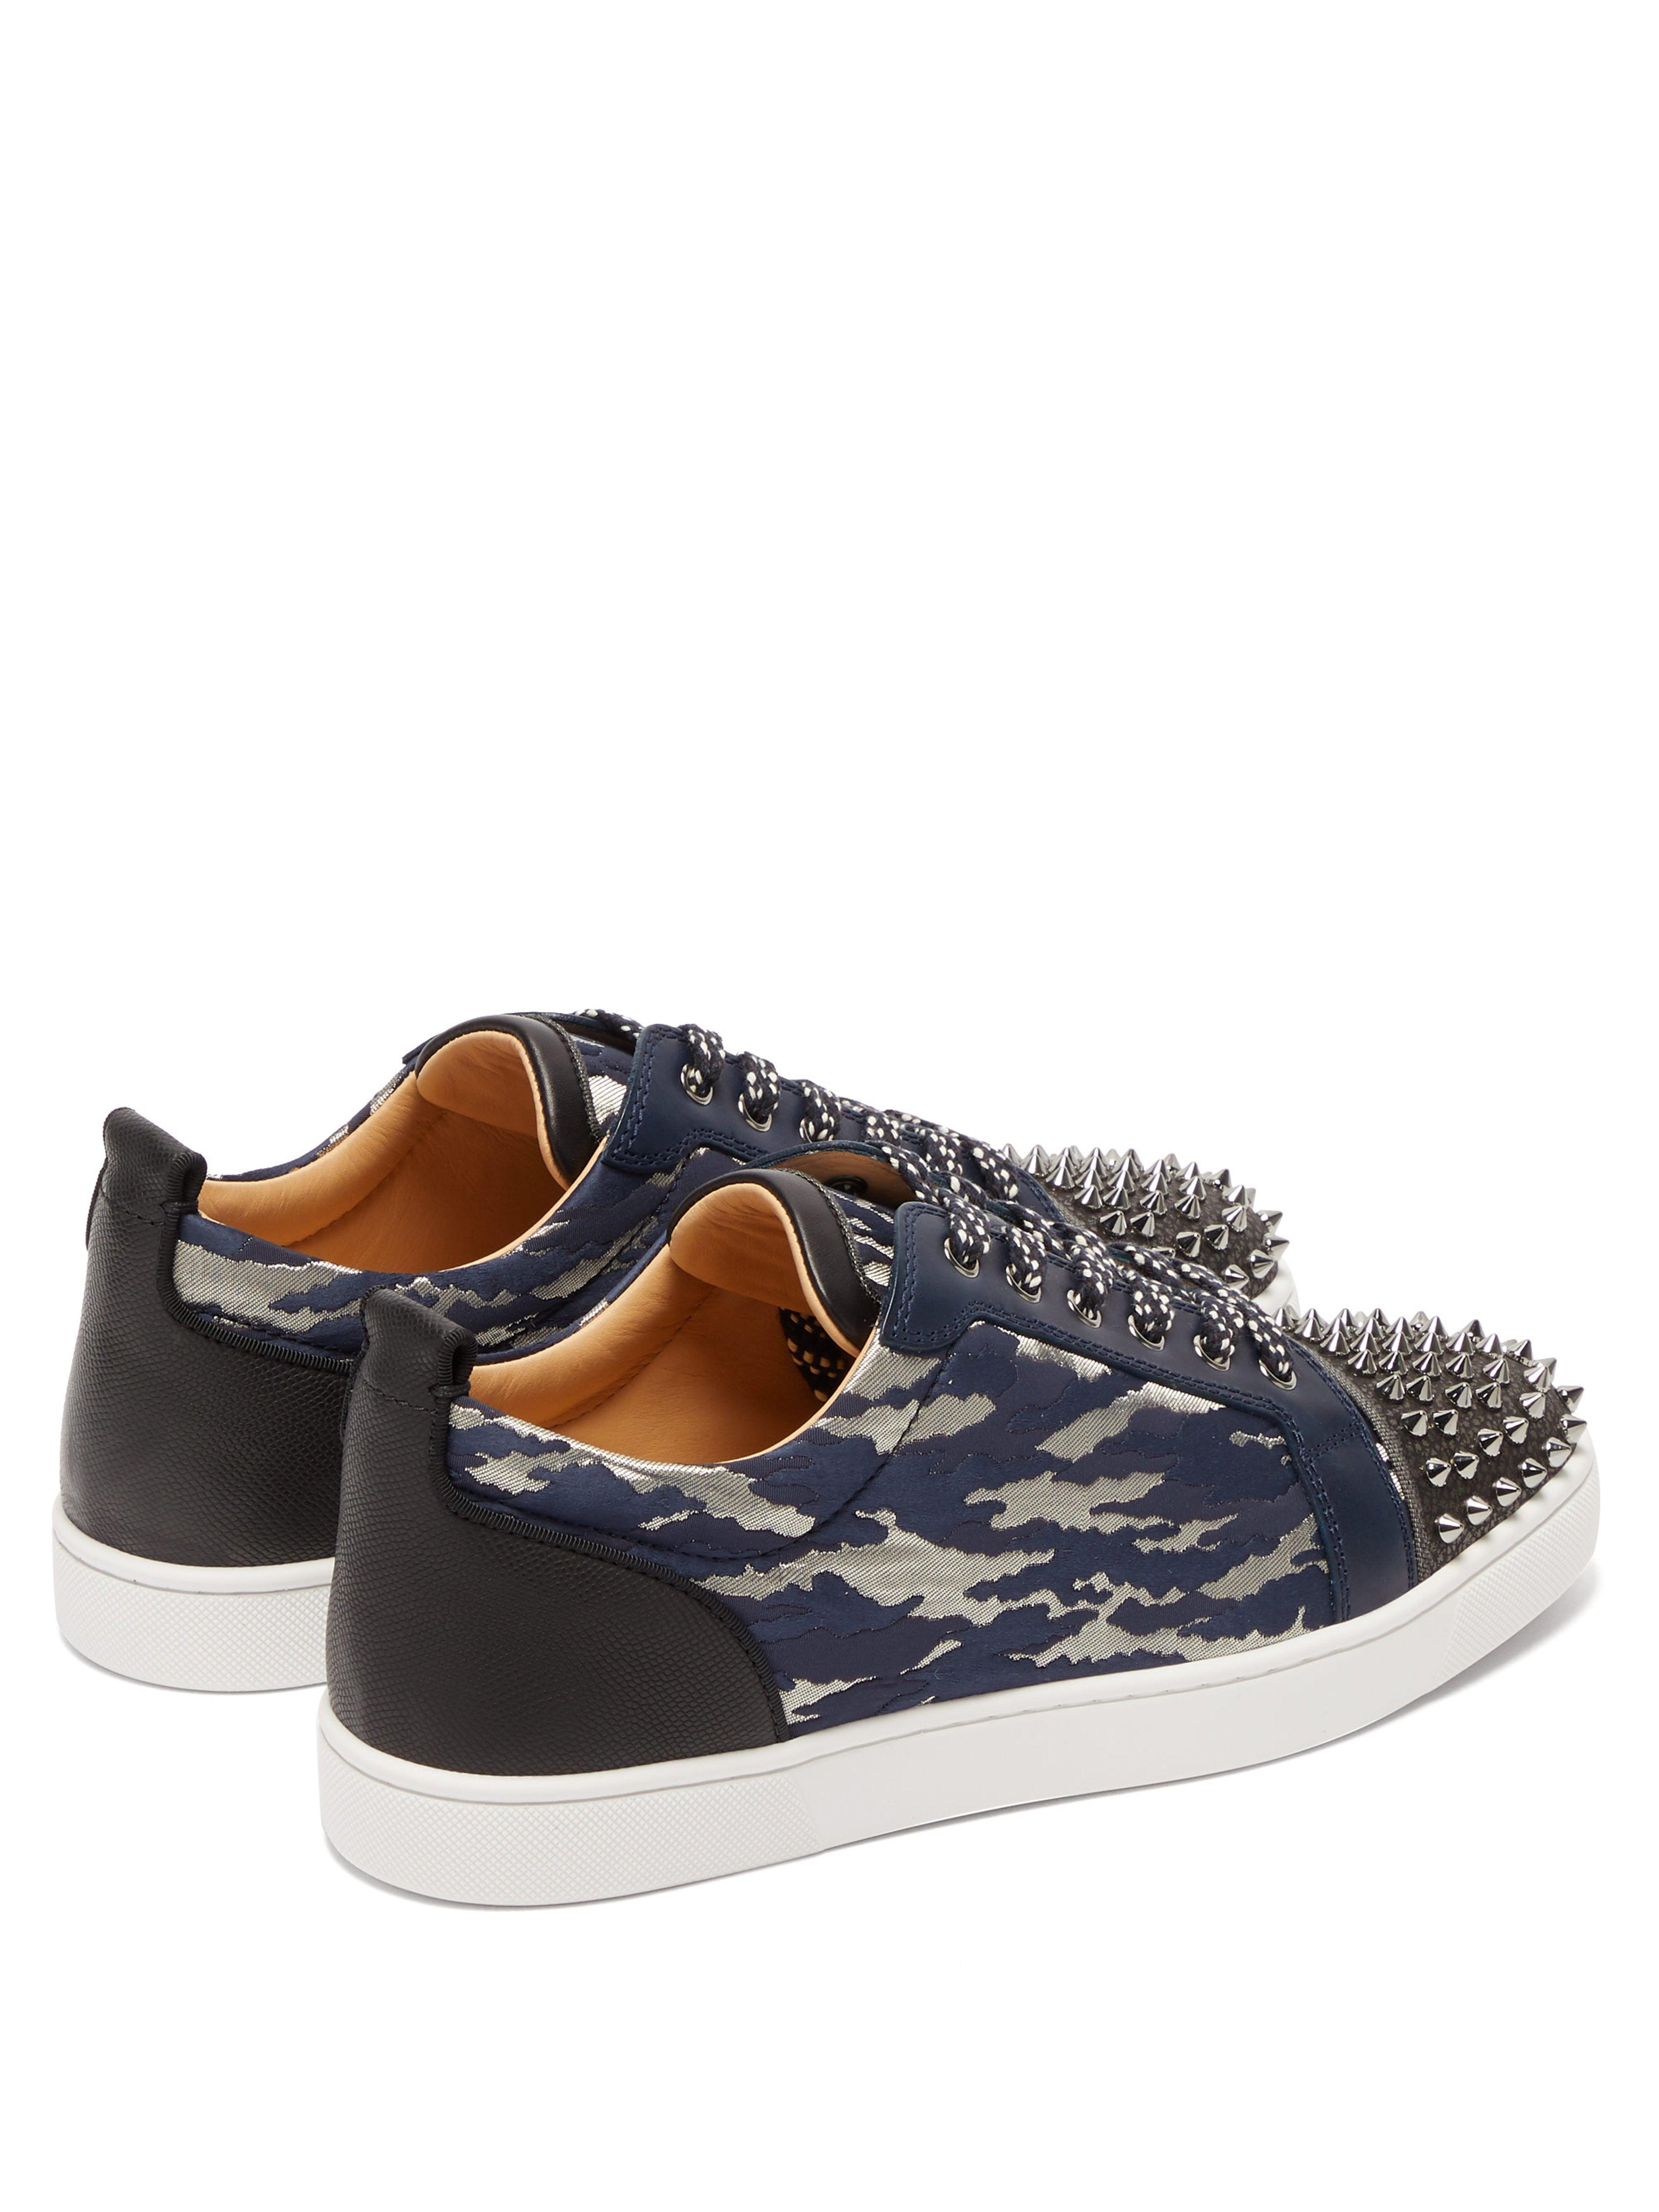 Christian Louboutin Leather Louis Junior Spikes Orlato Jacquard Camouloubi Trainers in Navy (Blue) for Men Lyst